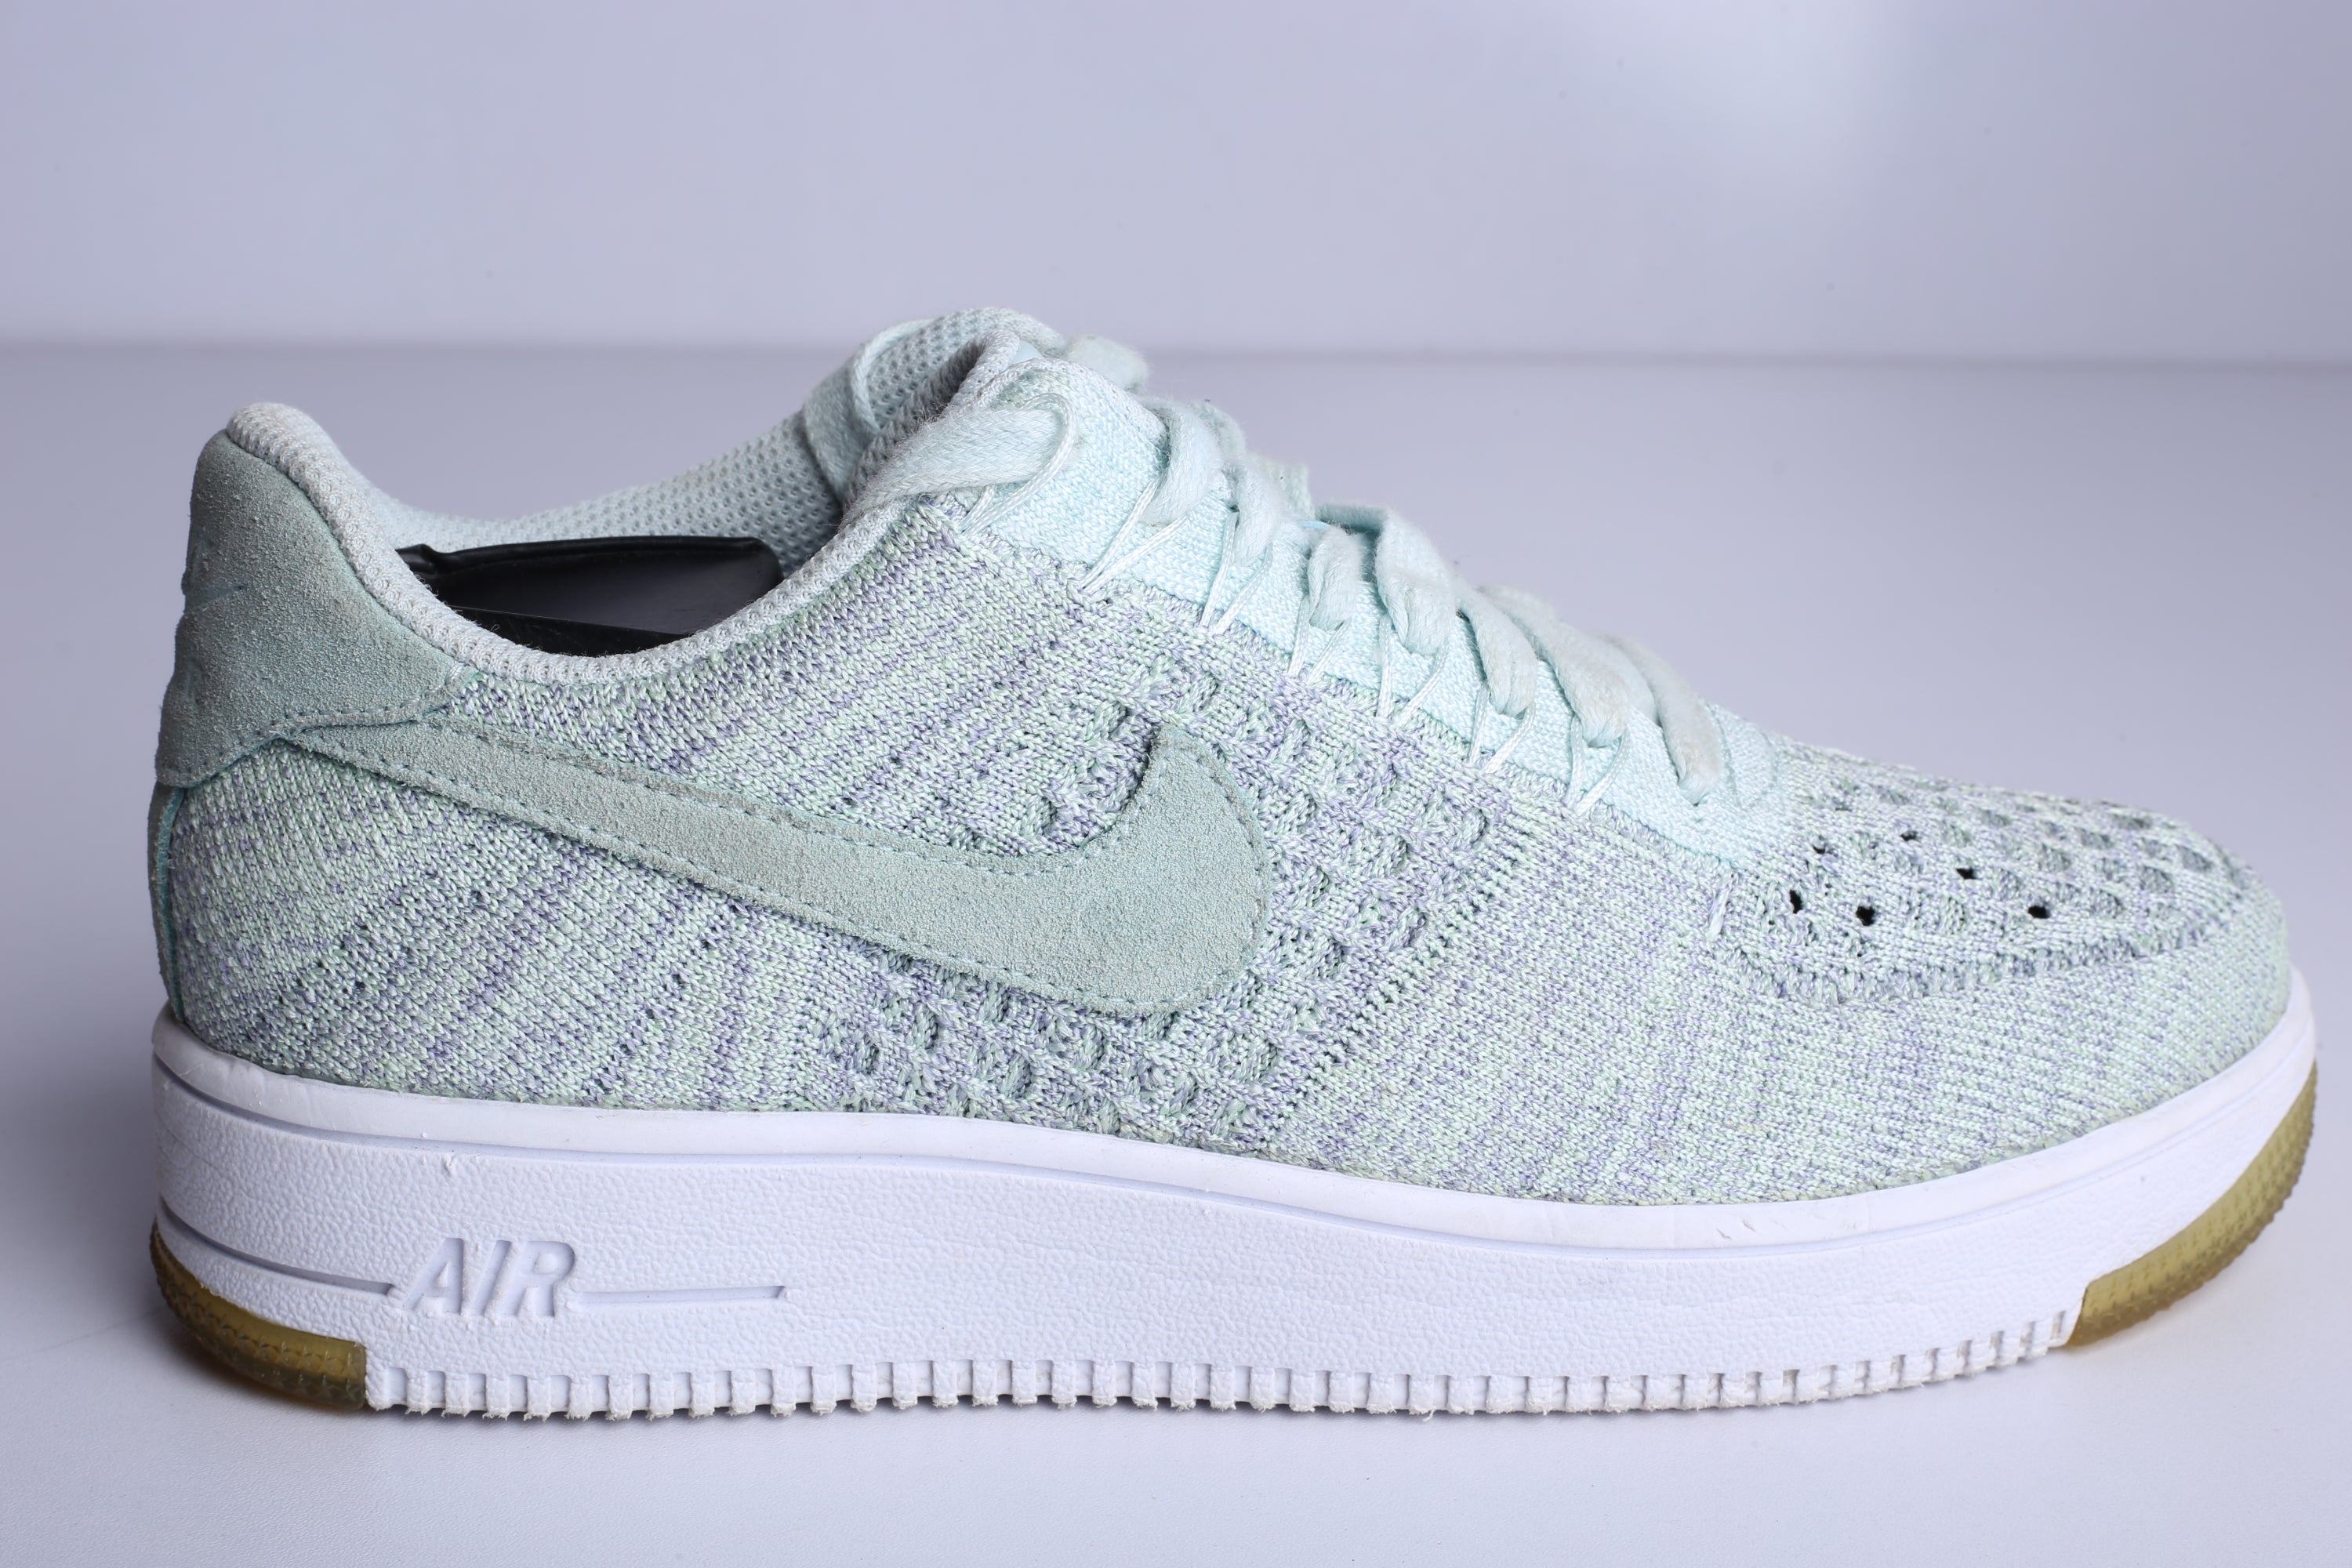 Nike Air Force 1 Flyknit Sneaker - (Condition Excellent)